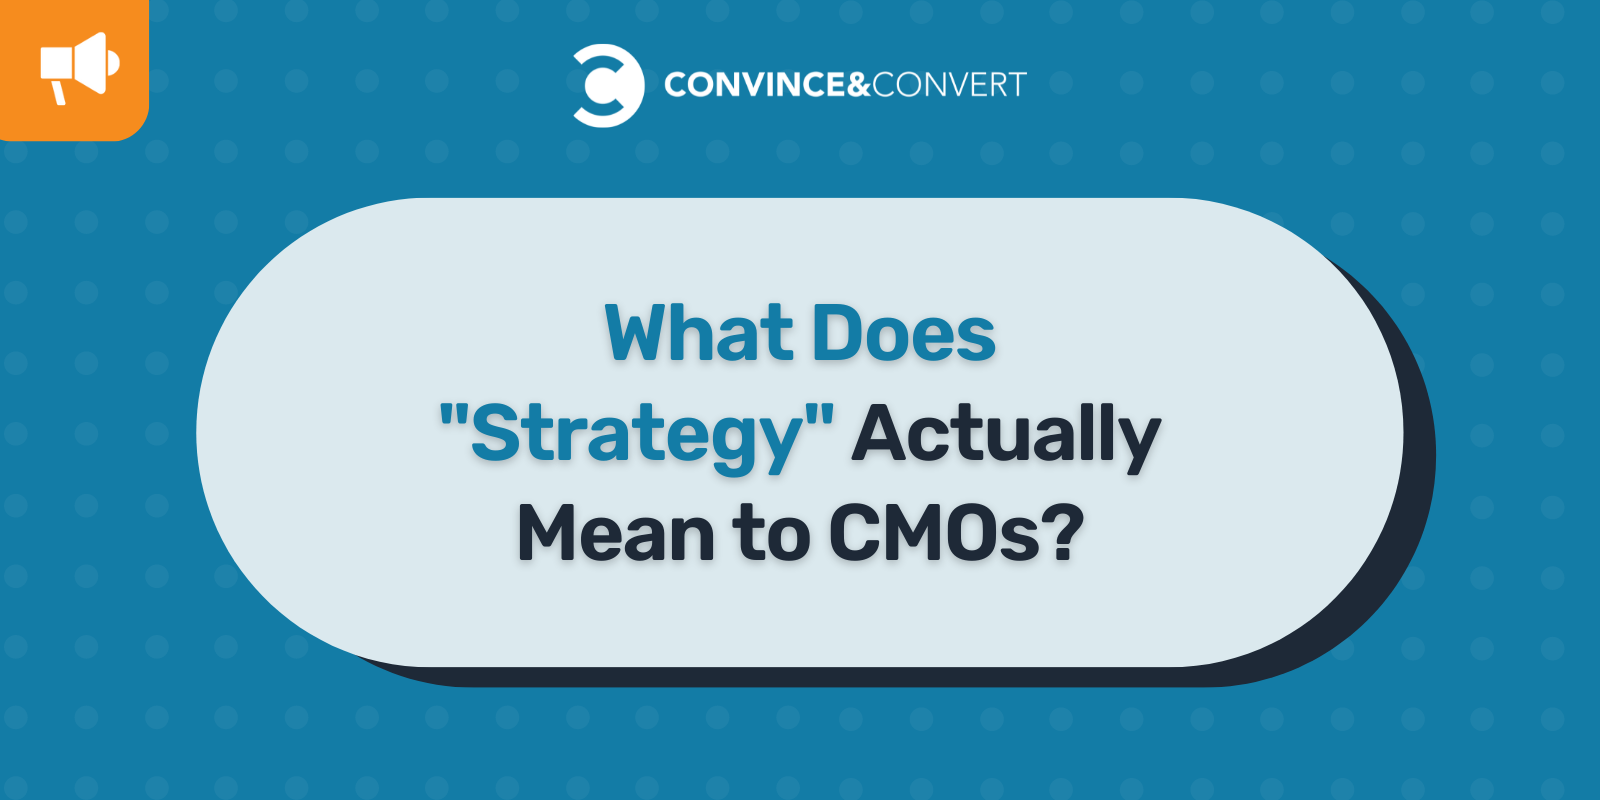 What Does "Strategy" Actually Mean to CMOs?